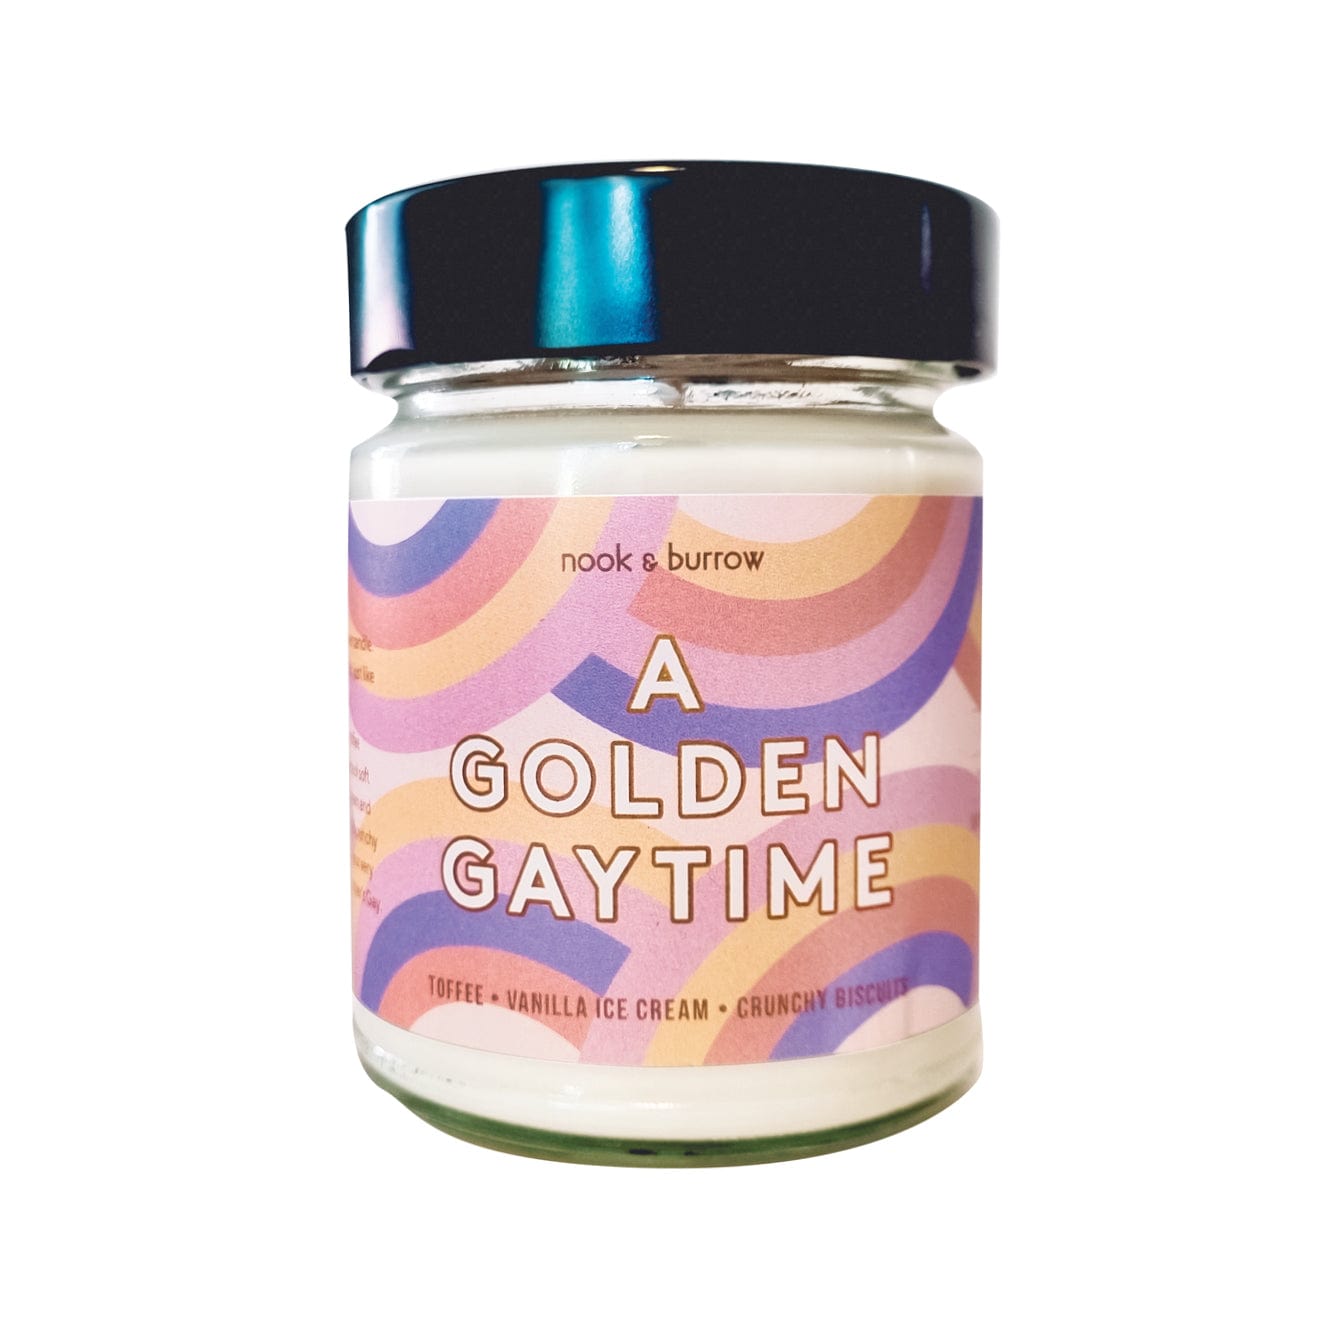 Nook & Burrow candle 270ml - 30+ hour burn time A Golden Gaytime | candle